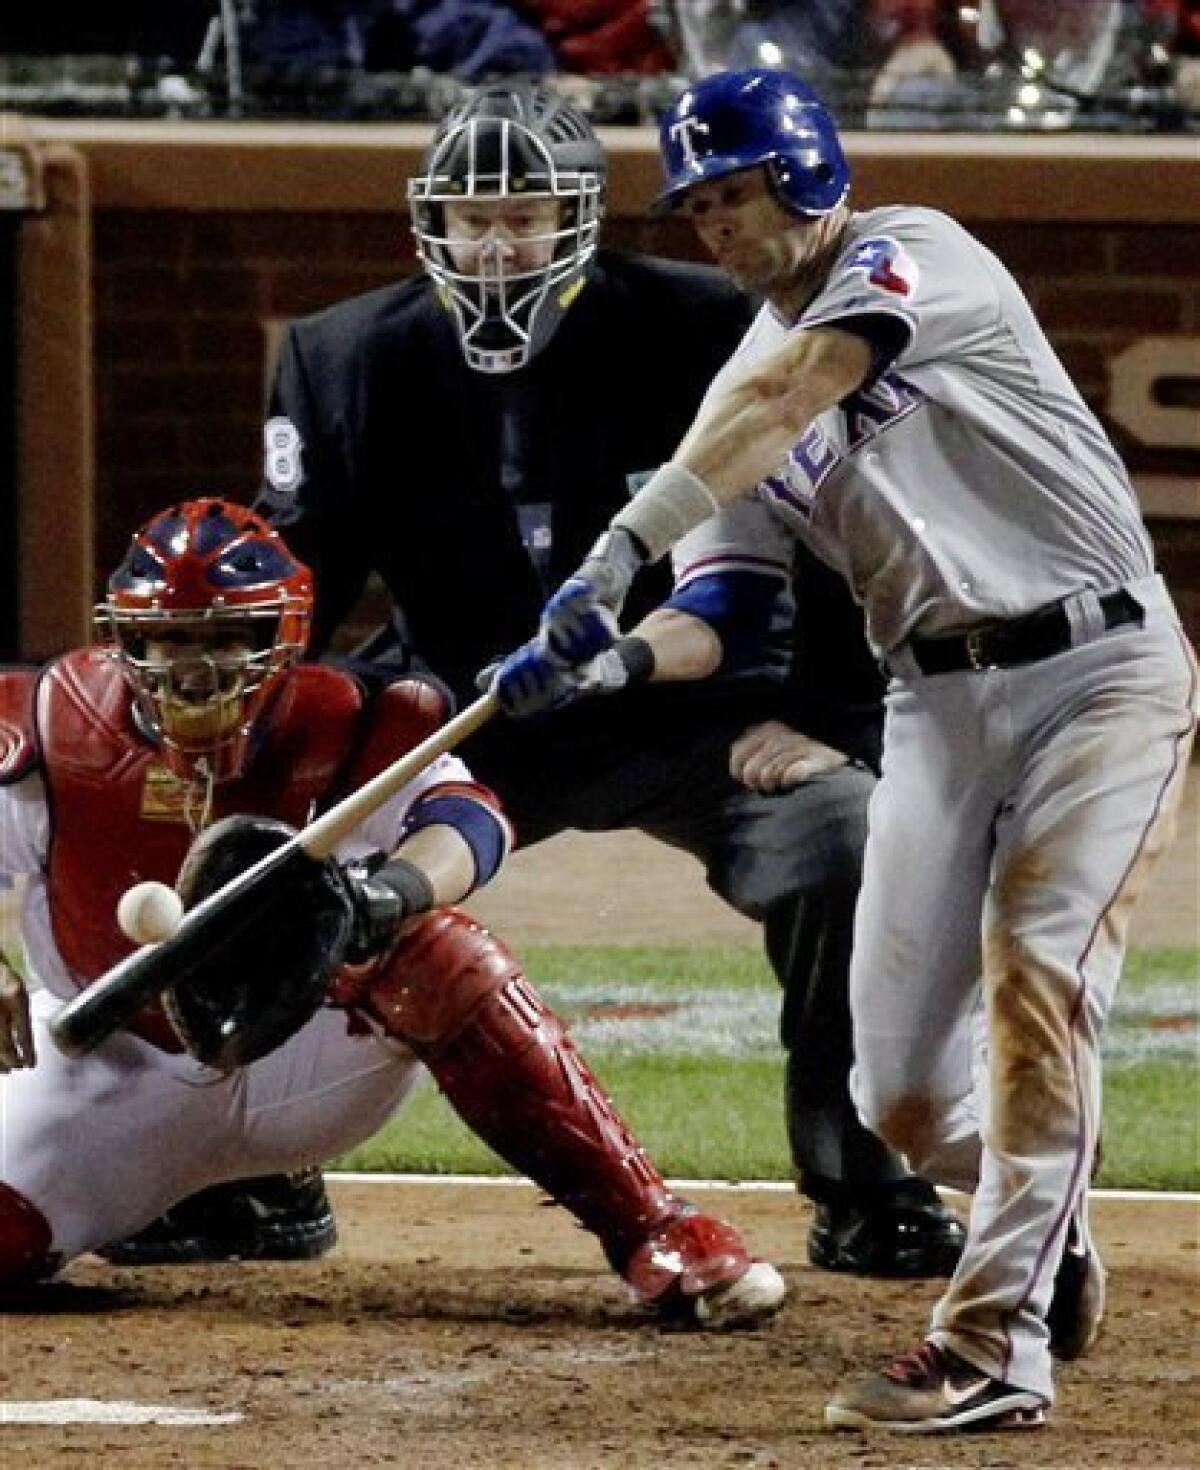 Game 6: HRs by Beltre, Cruz put Rangers up in 7th - The San Diego  Union-Tribune